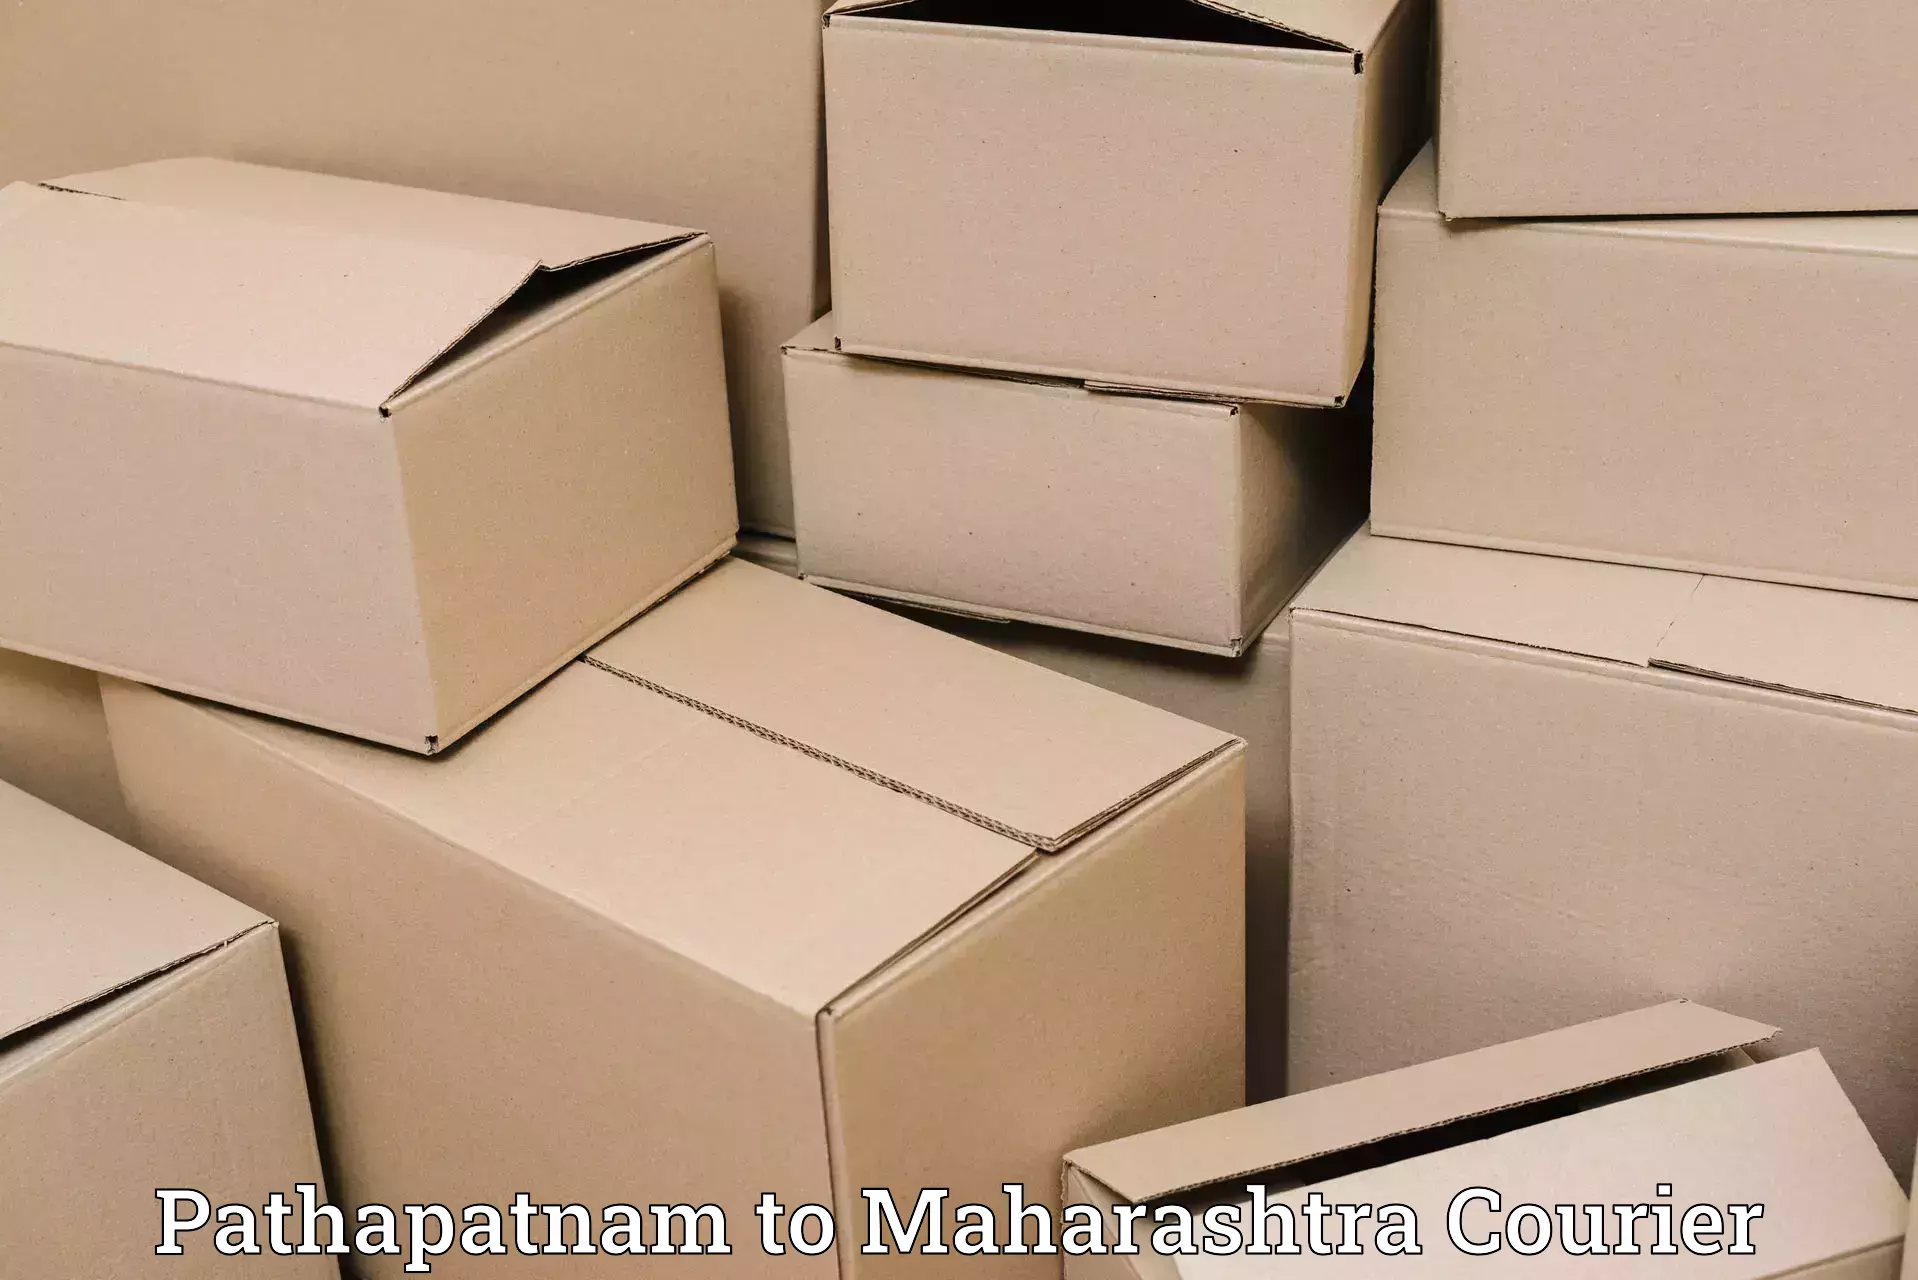 User-friendly courier app Pathapatnam to Dhule